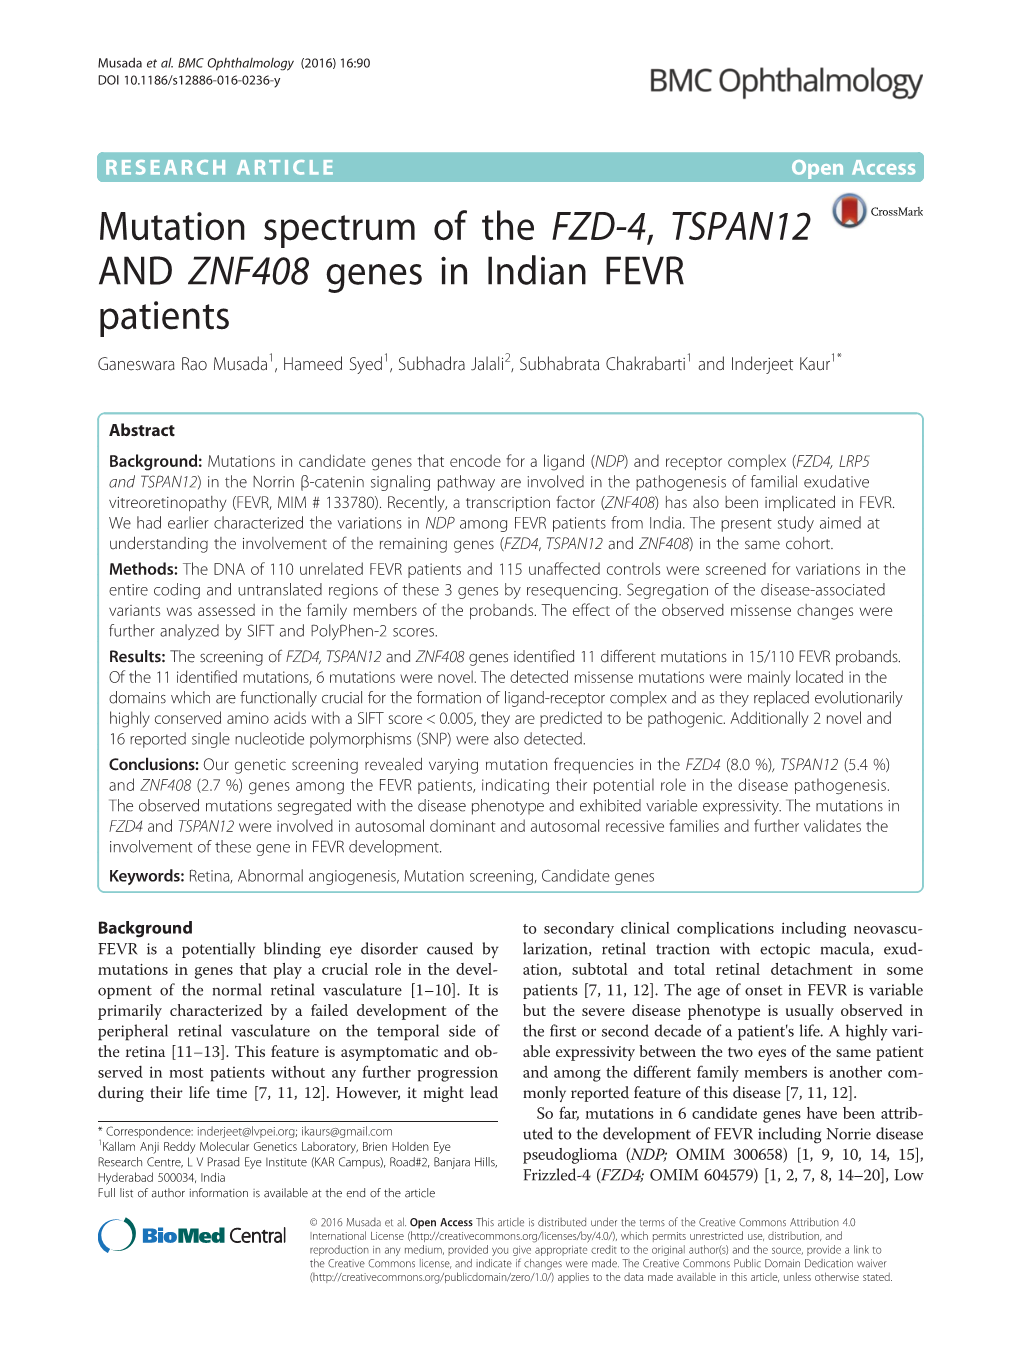 Mutation Spectrum of the FZD-4, TSPAN12 and ZNF408 Genes In